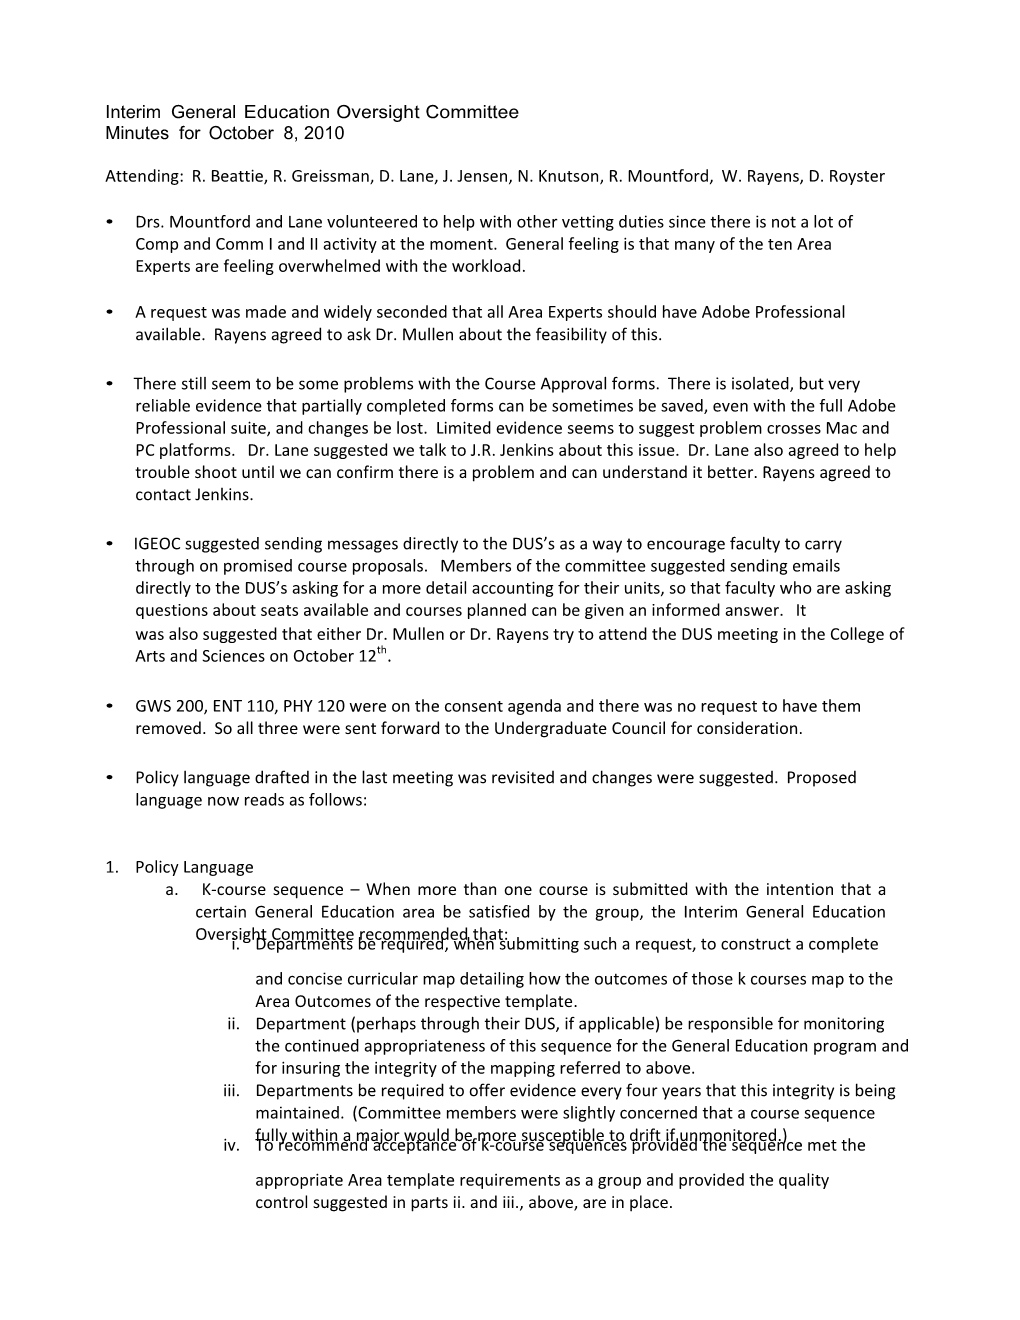 Interim General Education Oversight Committee Minutes from October 8Th Meeting